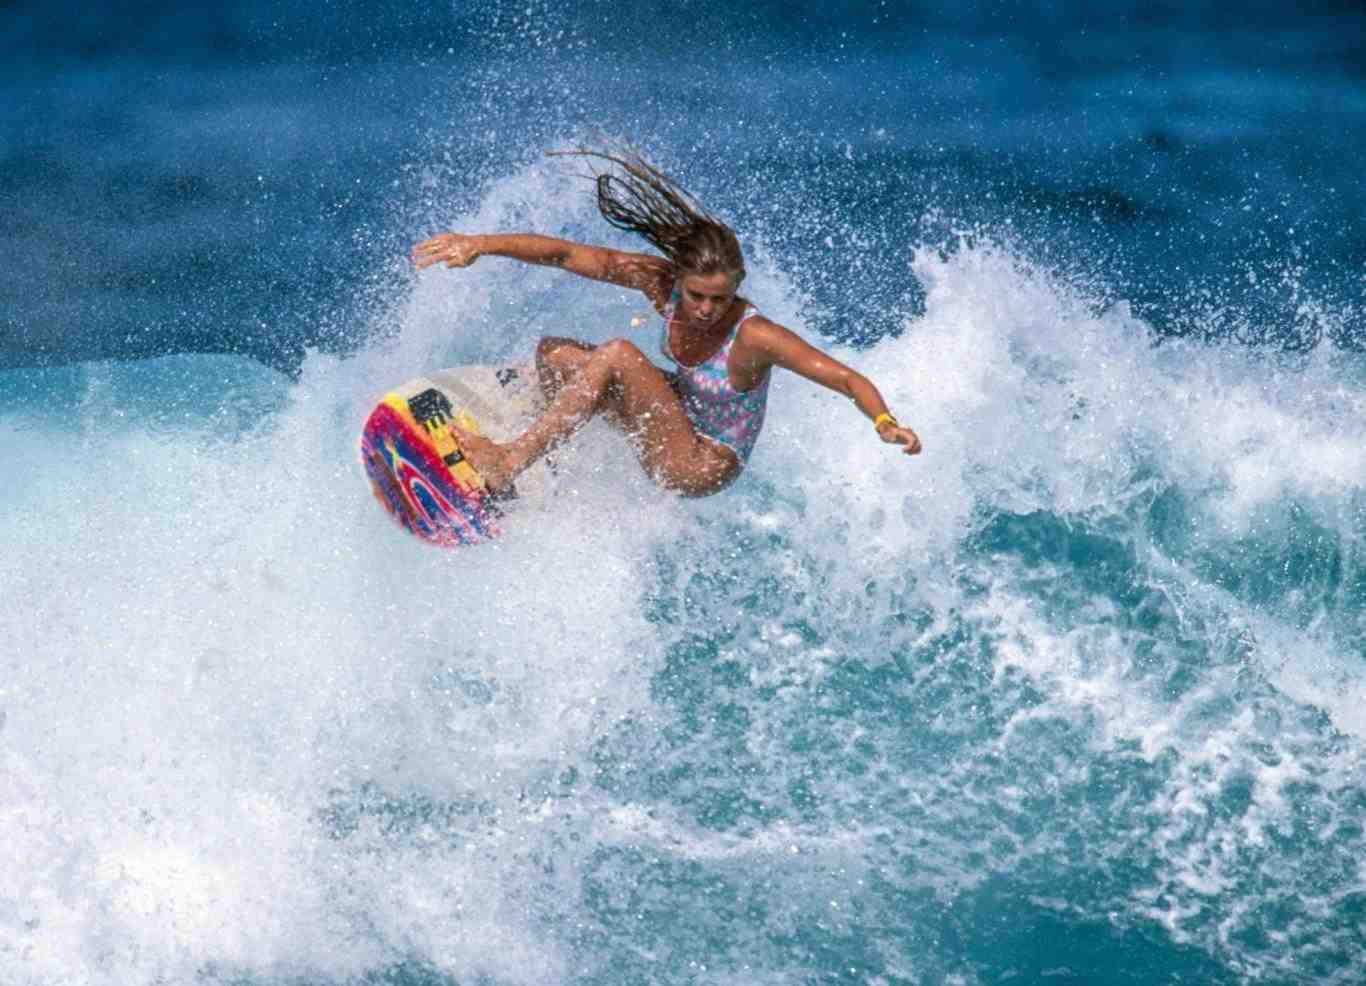 Who is the number 1 female surfer in the world?